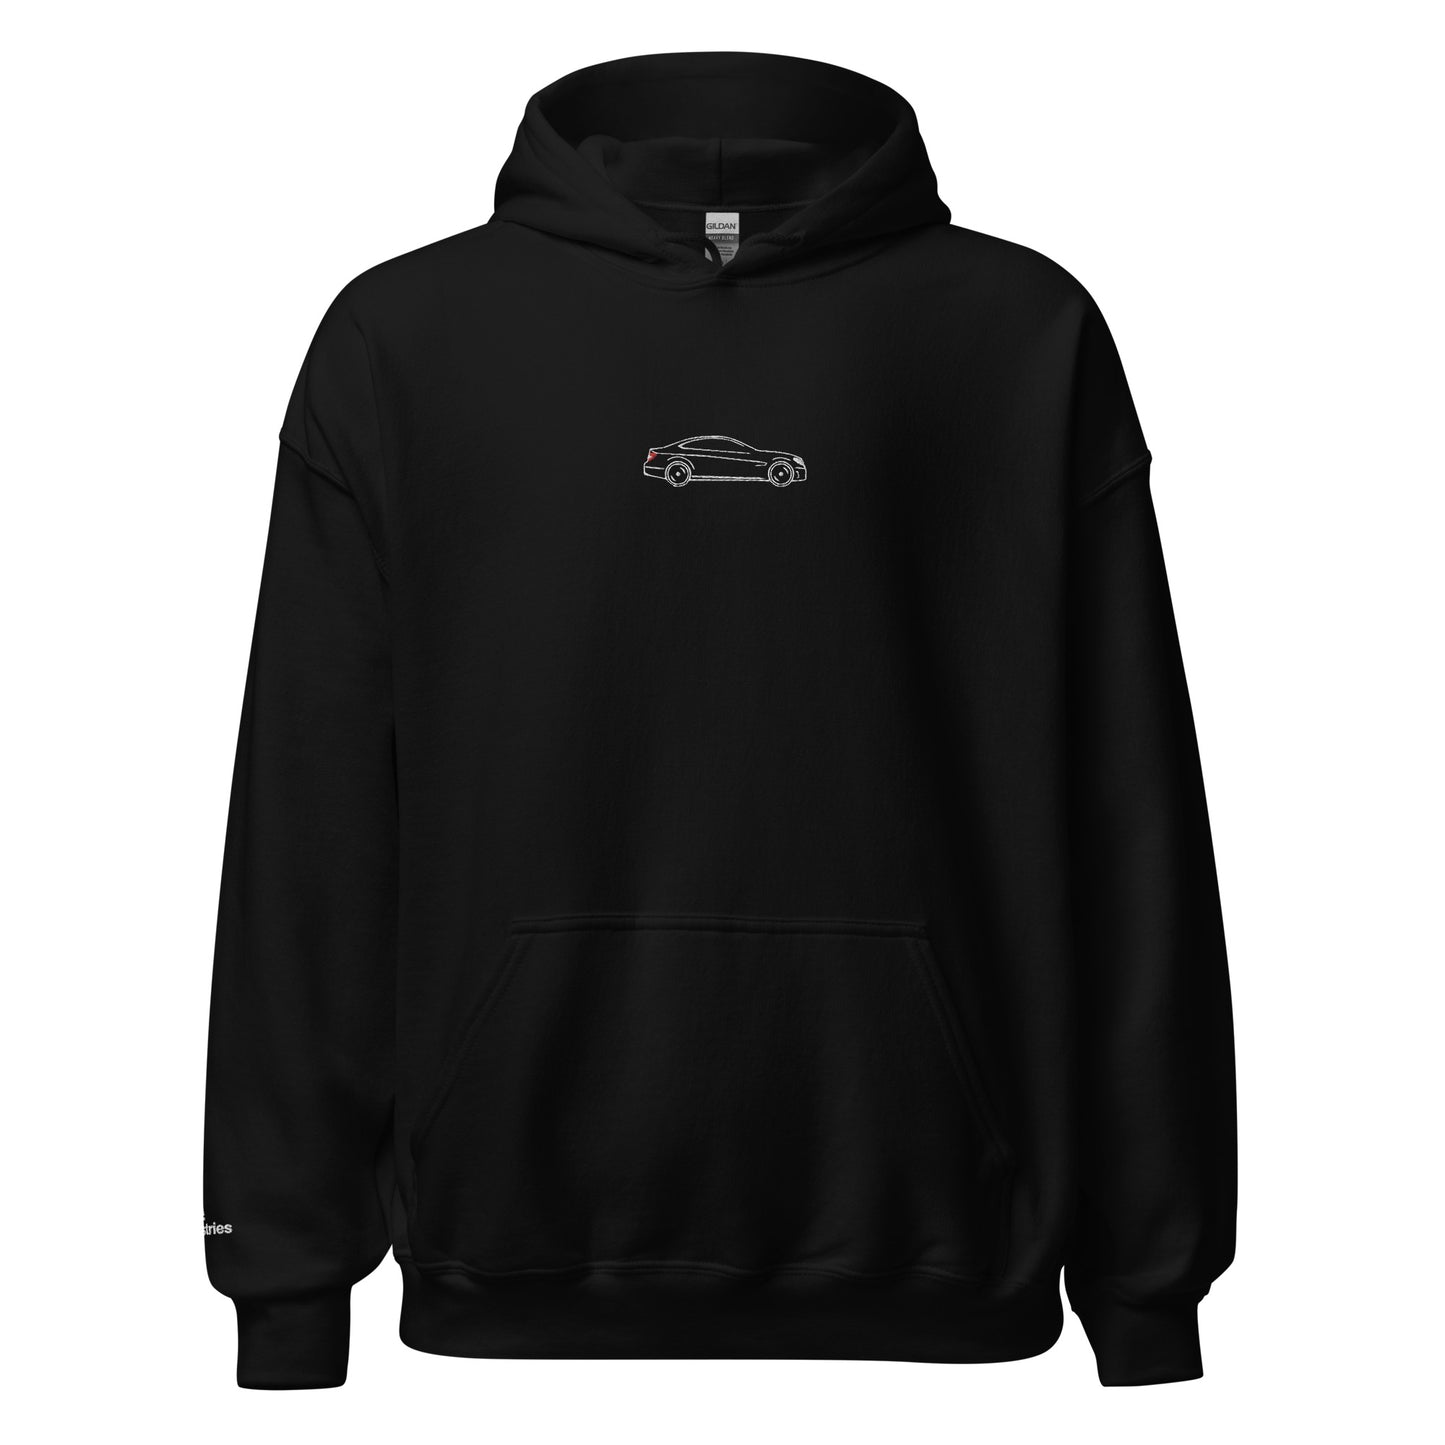 W204 C63 Silhouette Embroidered Hoodie